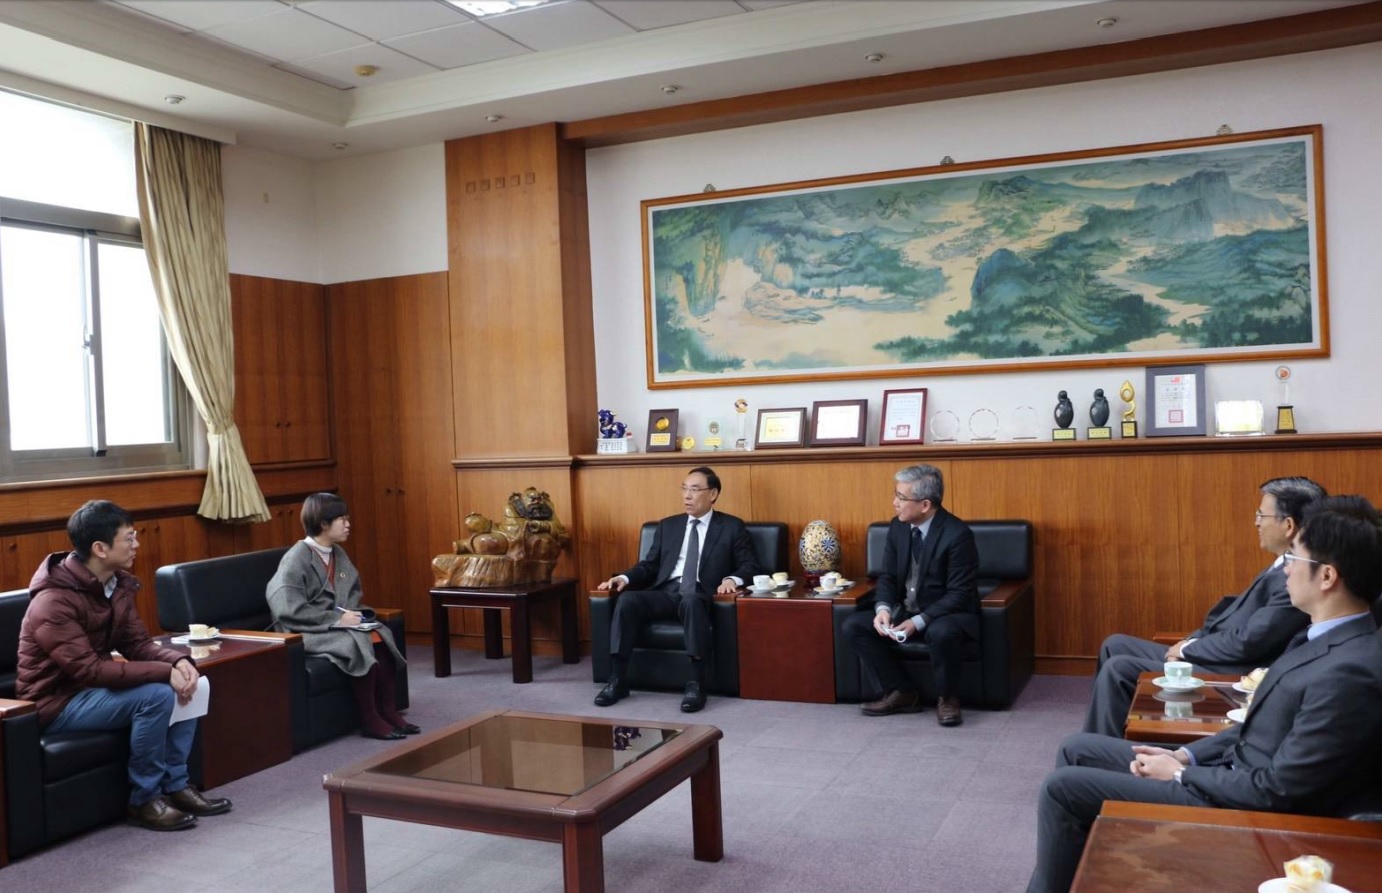 The Minister of Justice expresses concern for colleagues from the Miaoli District Prosecutor’s Office